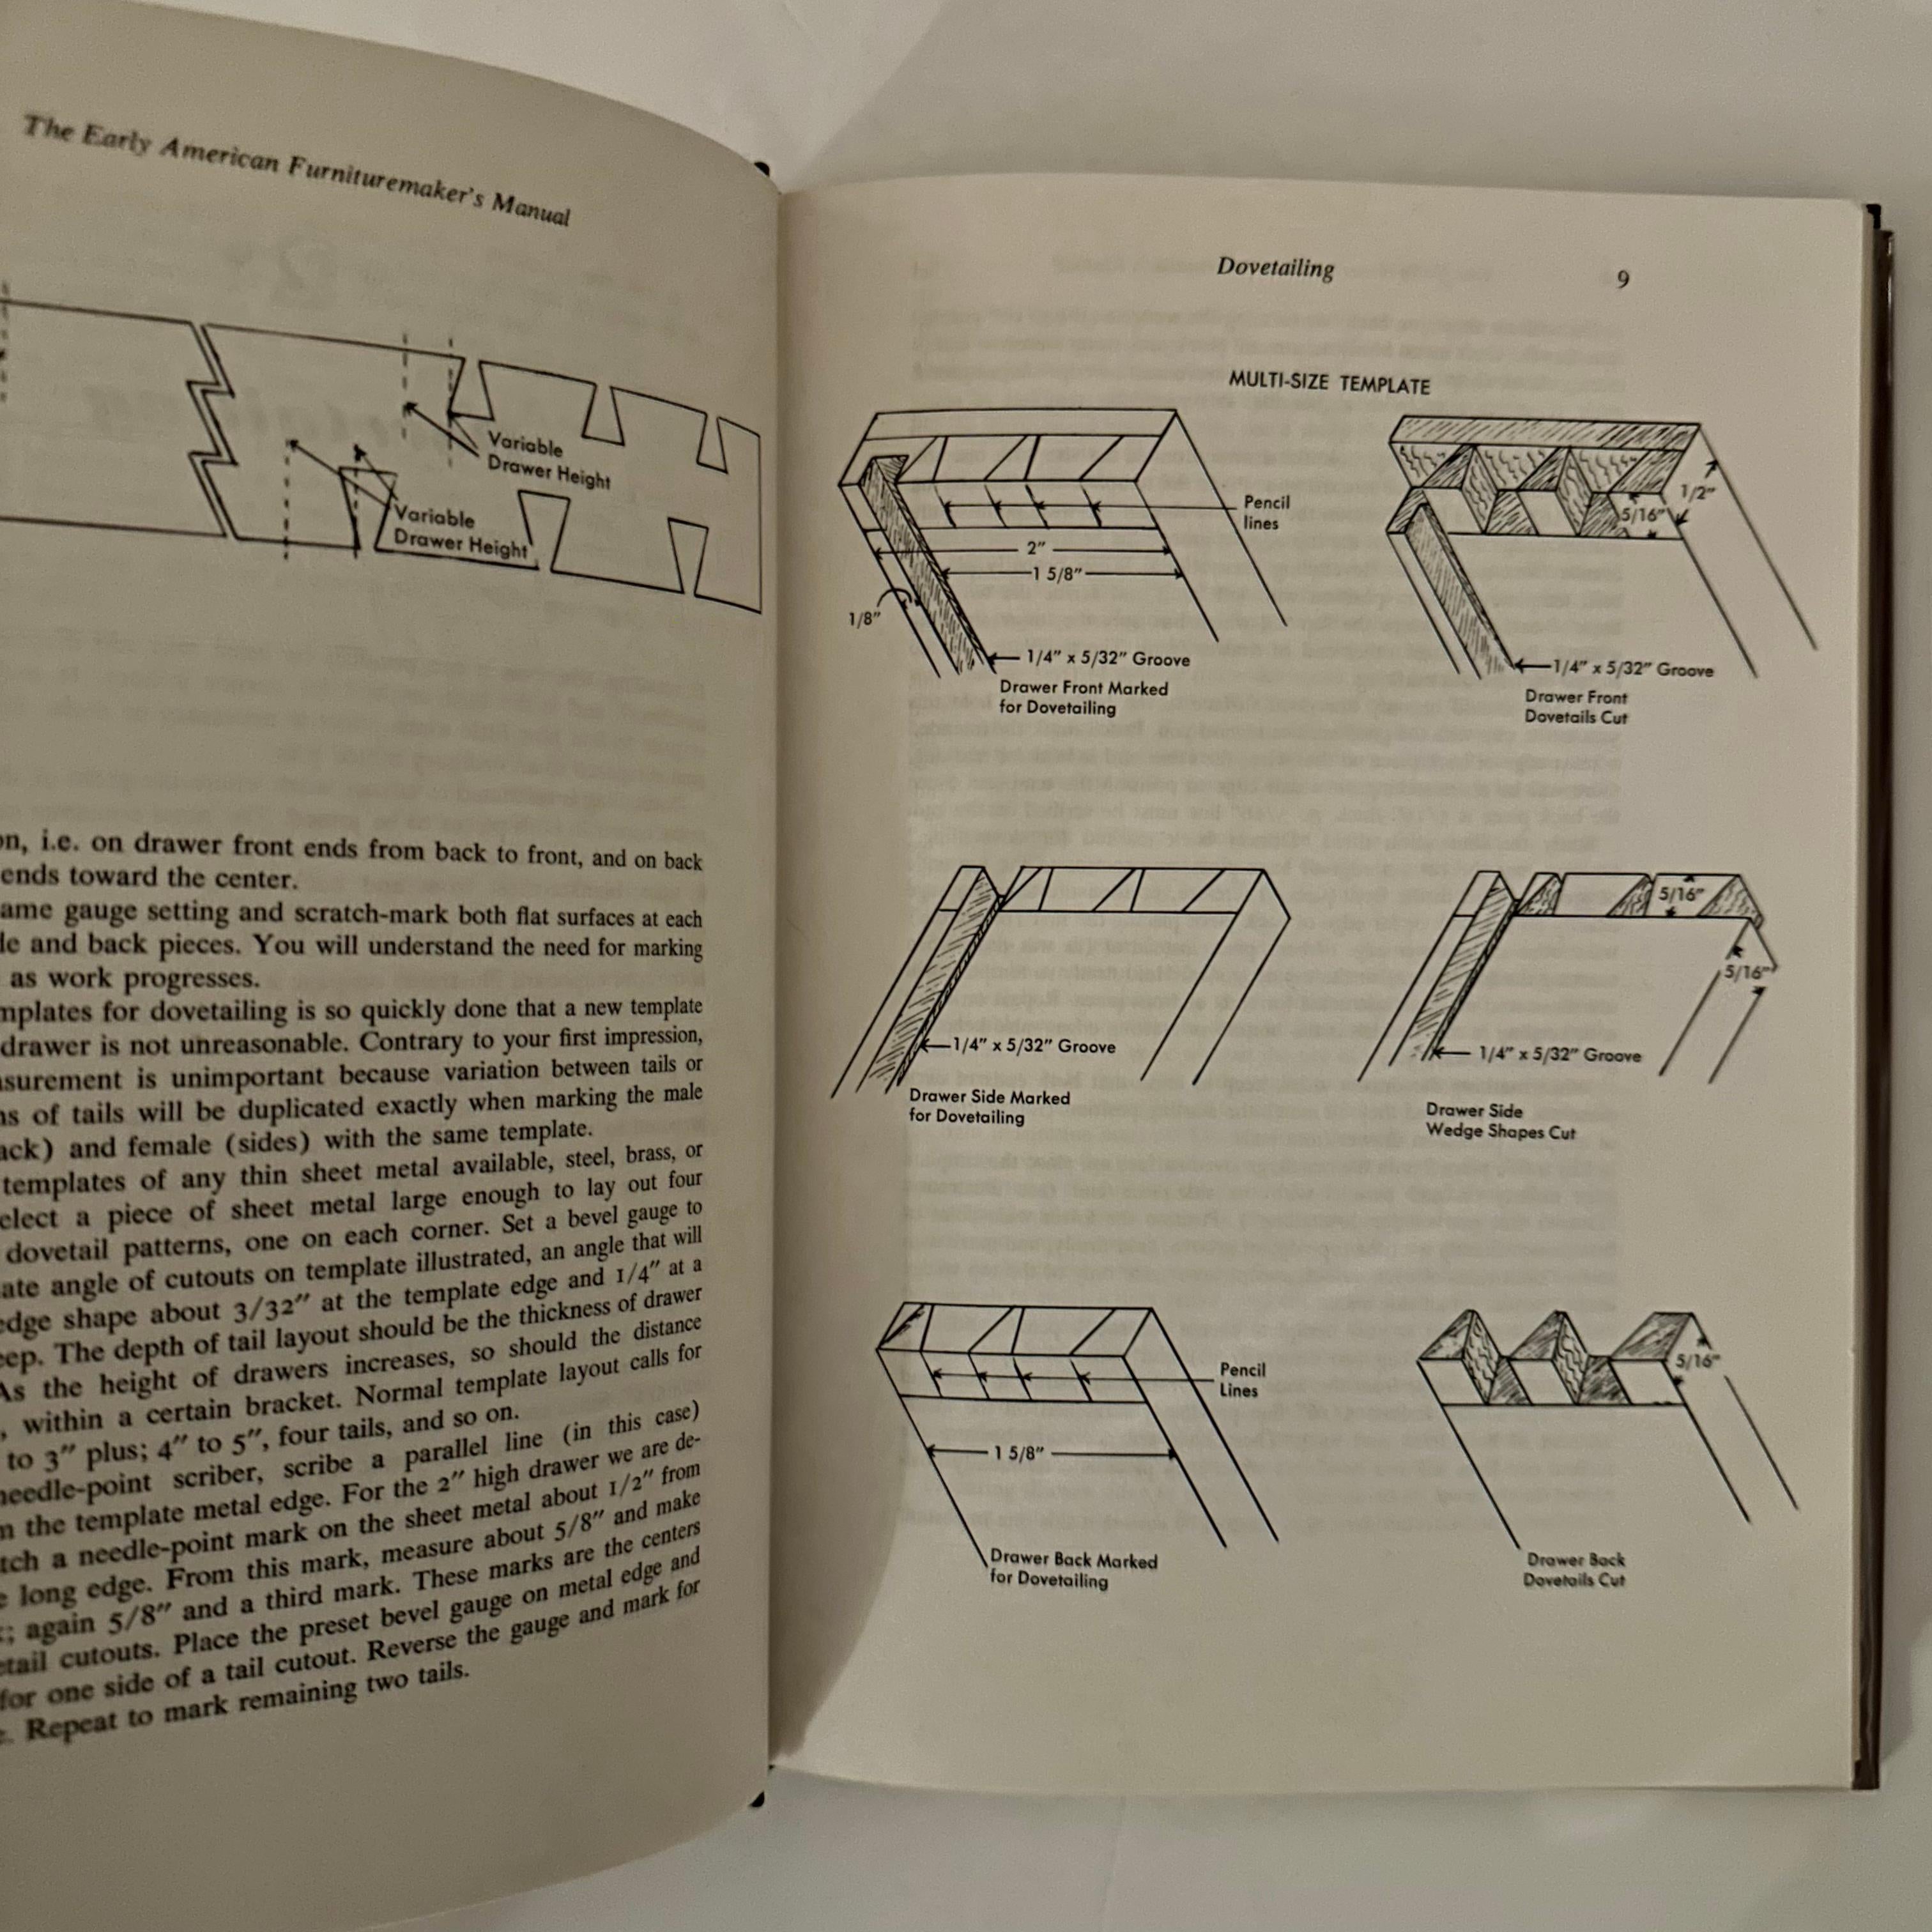 The Early American Furniture Maker's Manual - A. W. Marlow - New York, 1974 1